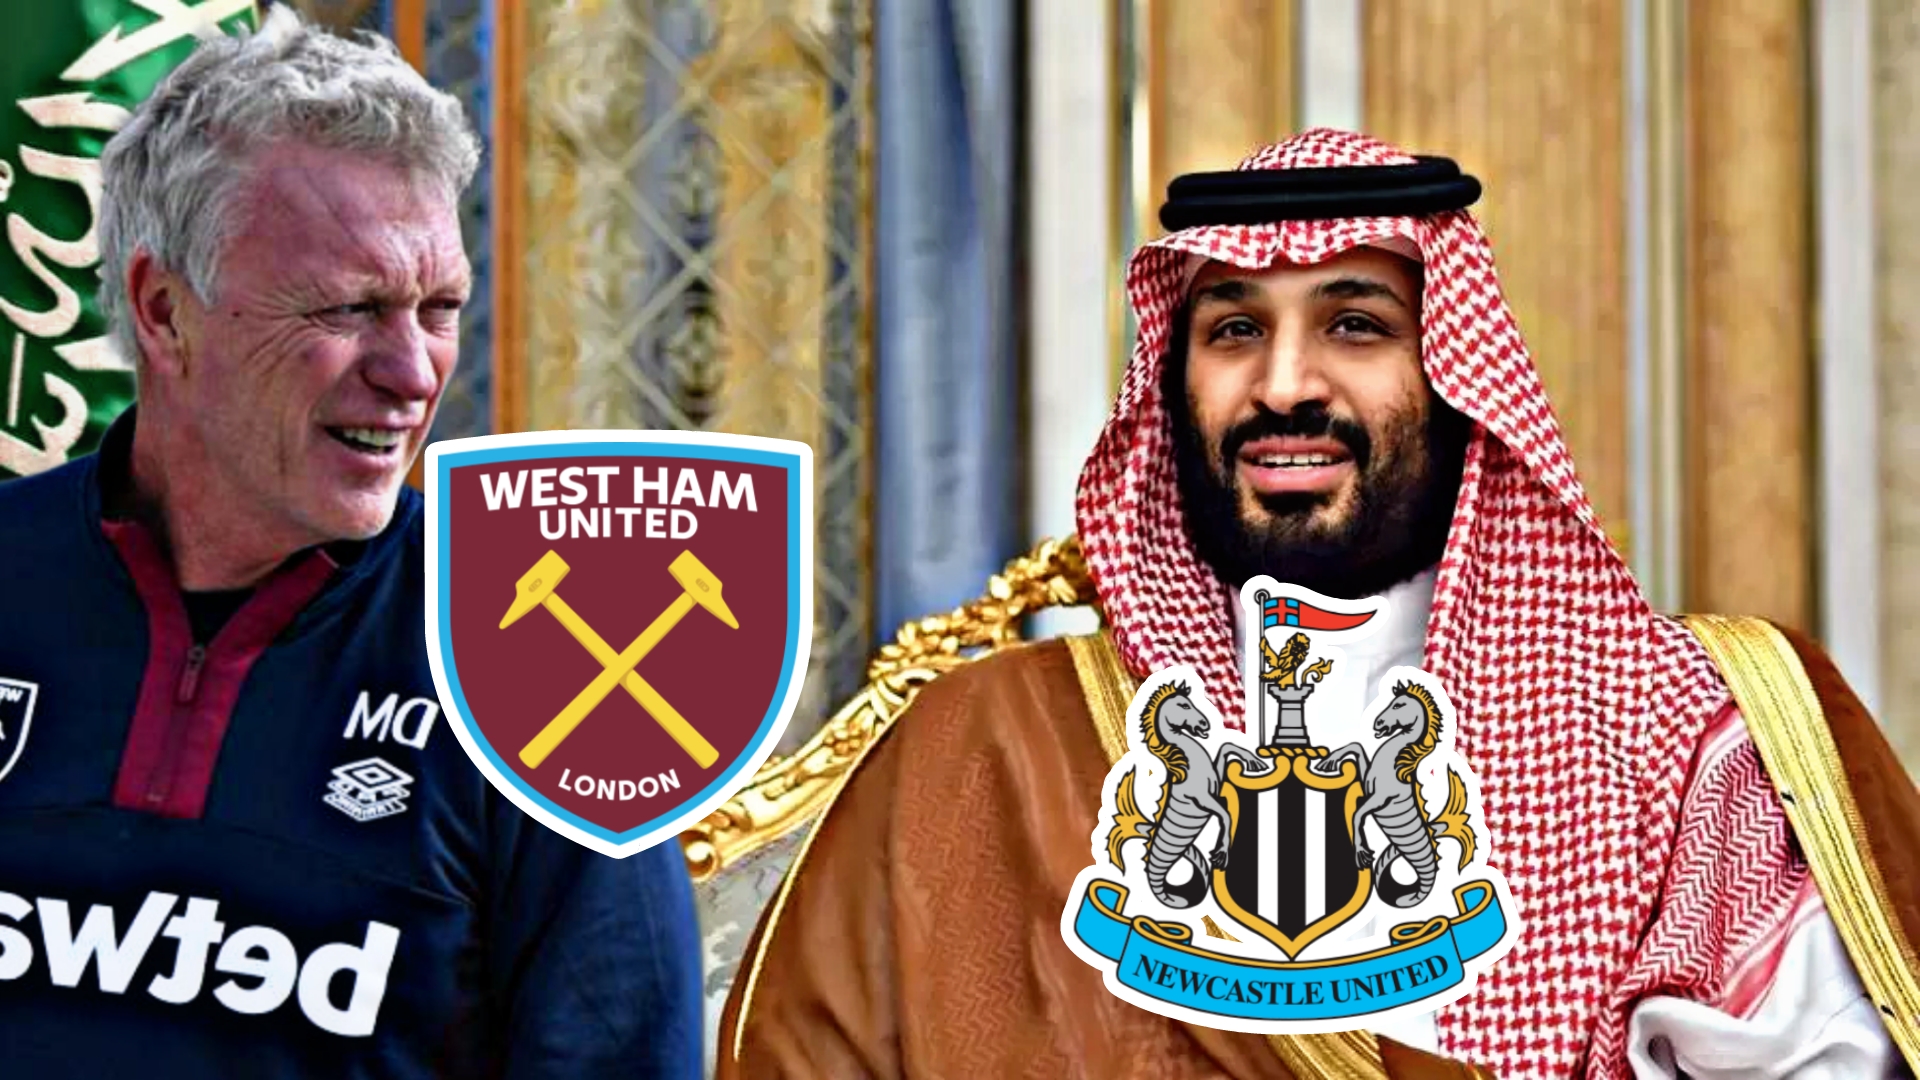 Mohammed bin Salman burst into laughs as Westham united wants to hijack 18-year-old star Midfielder from Newcastle united